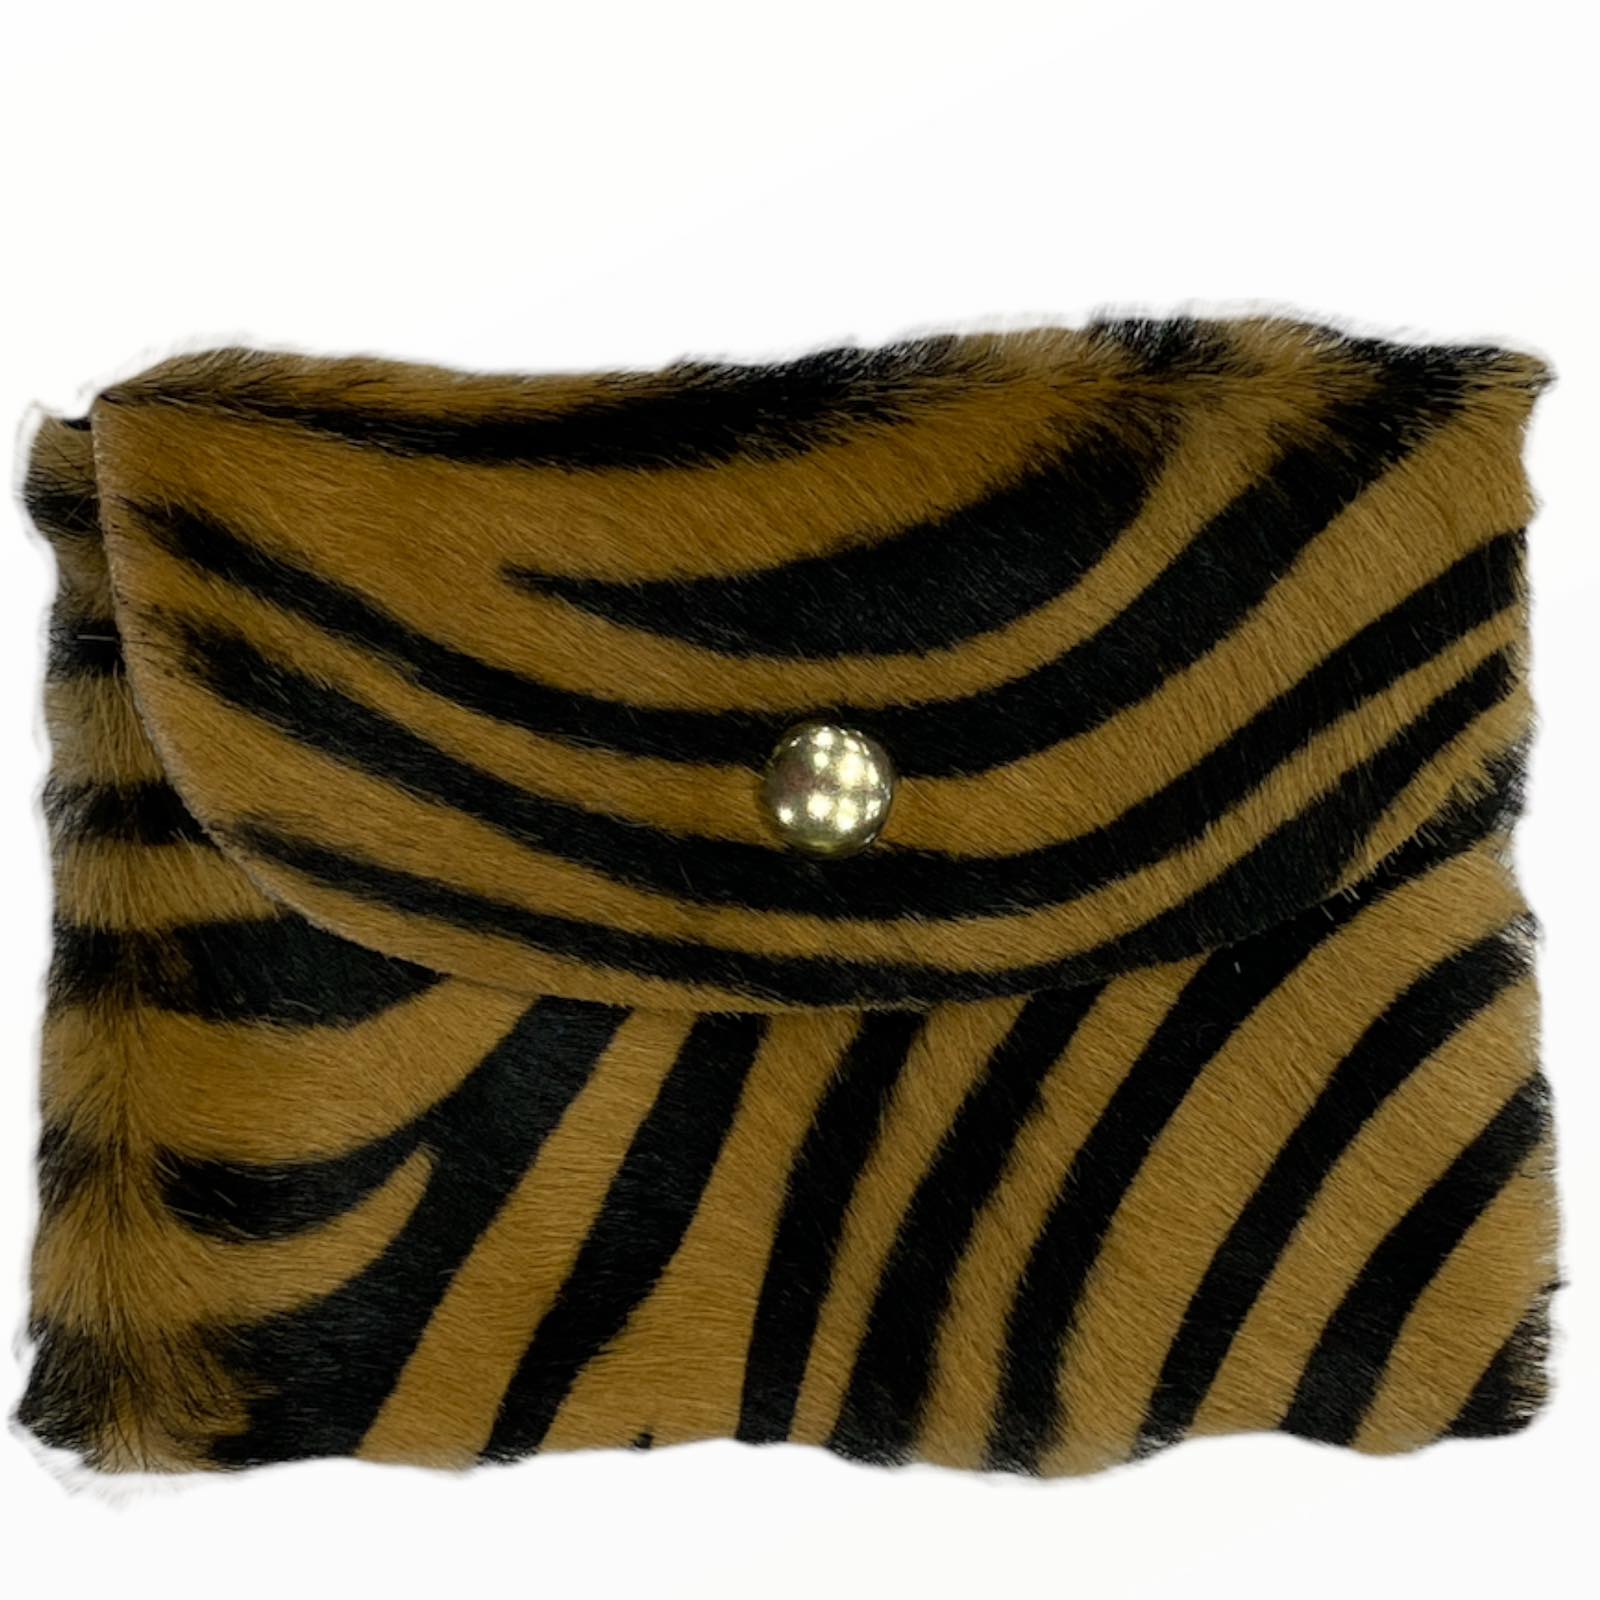 Zebra-print leather wallet for cards